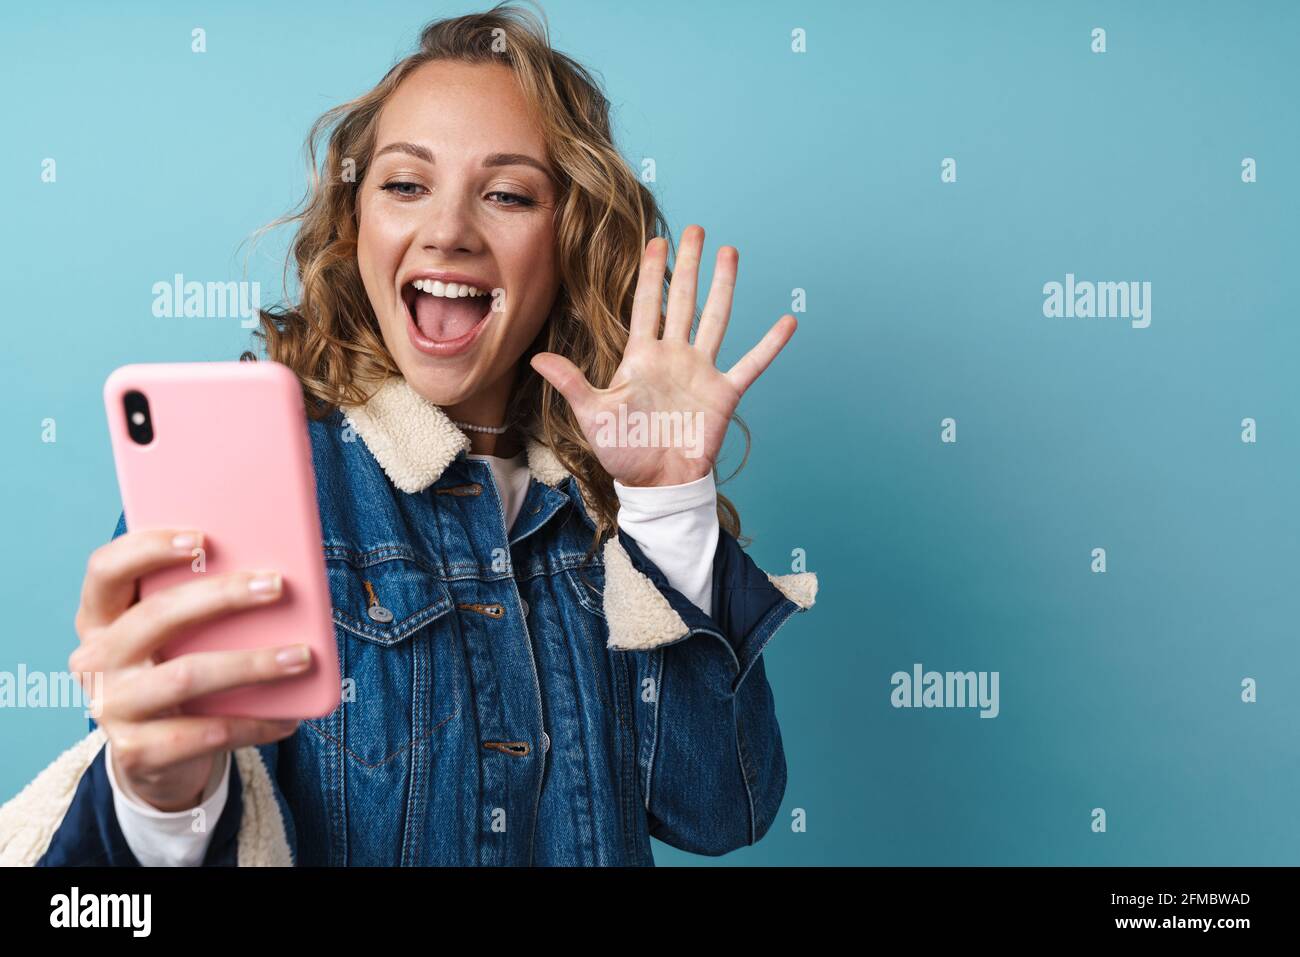 Blonde excited woman using mobile phone and gesturing isolated over blue wall Stock Photo